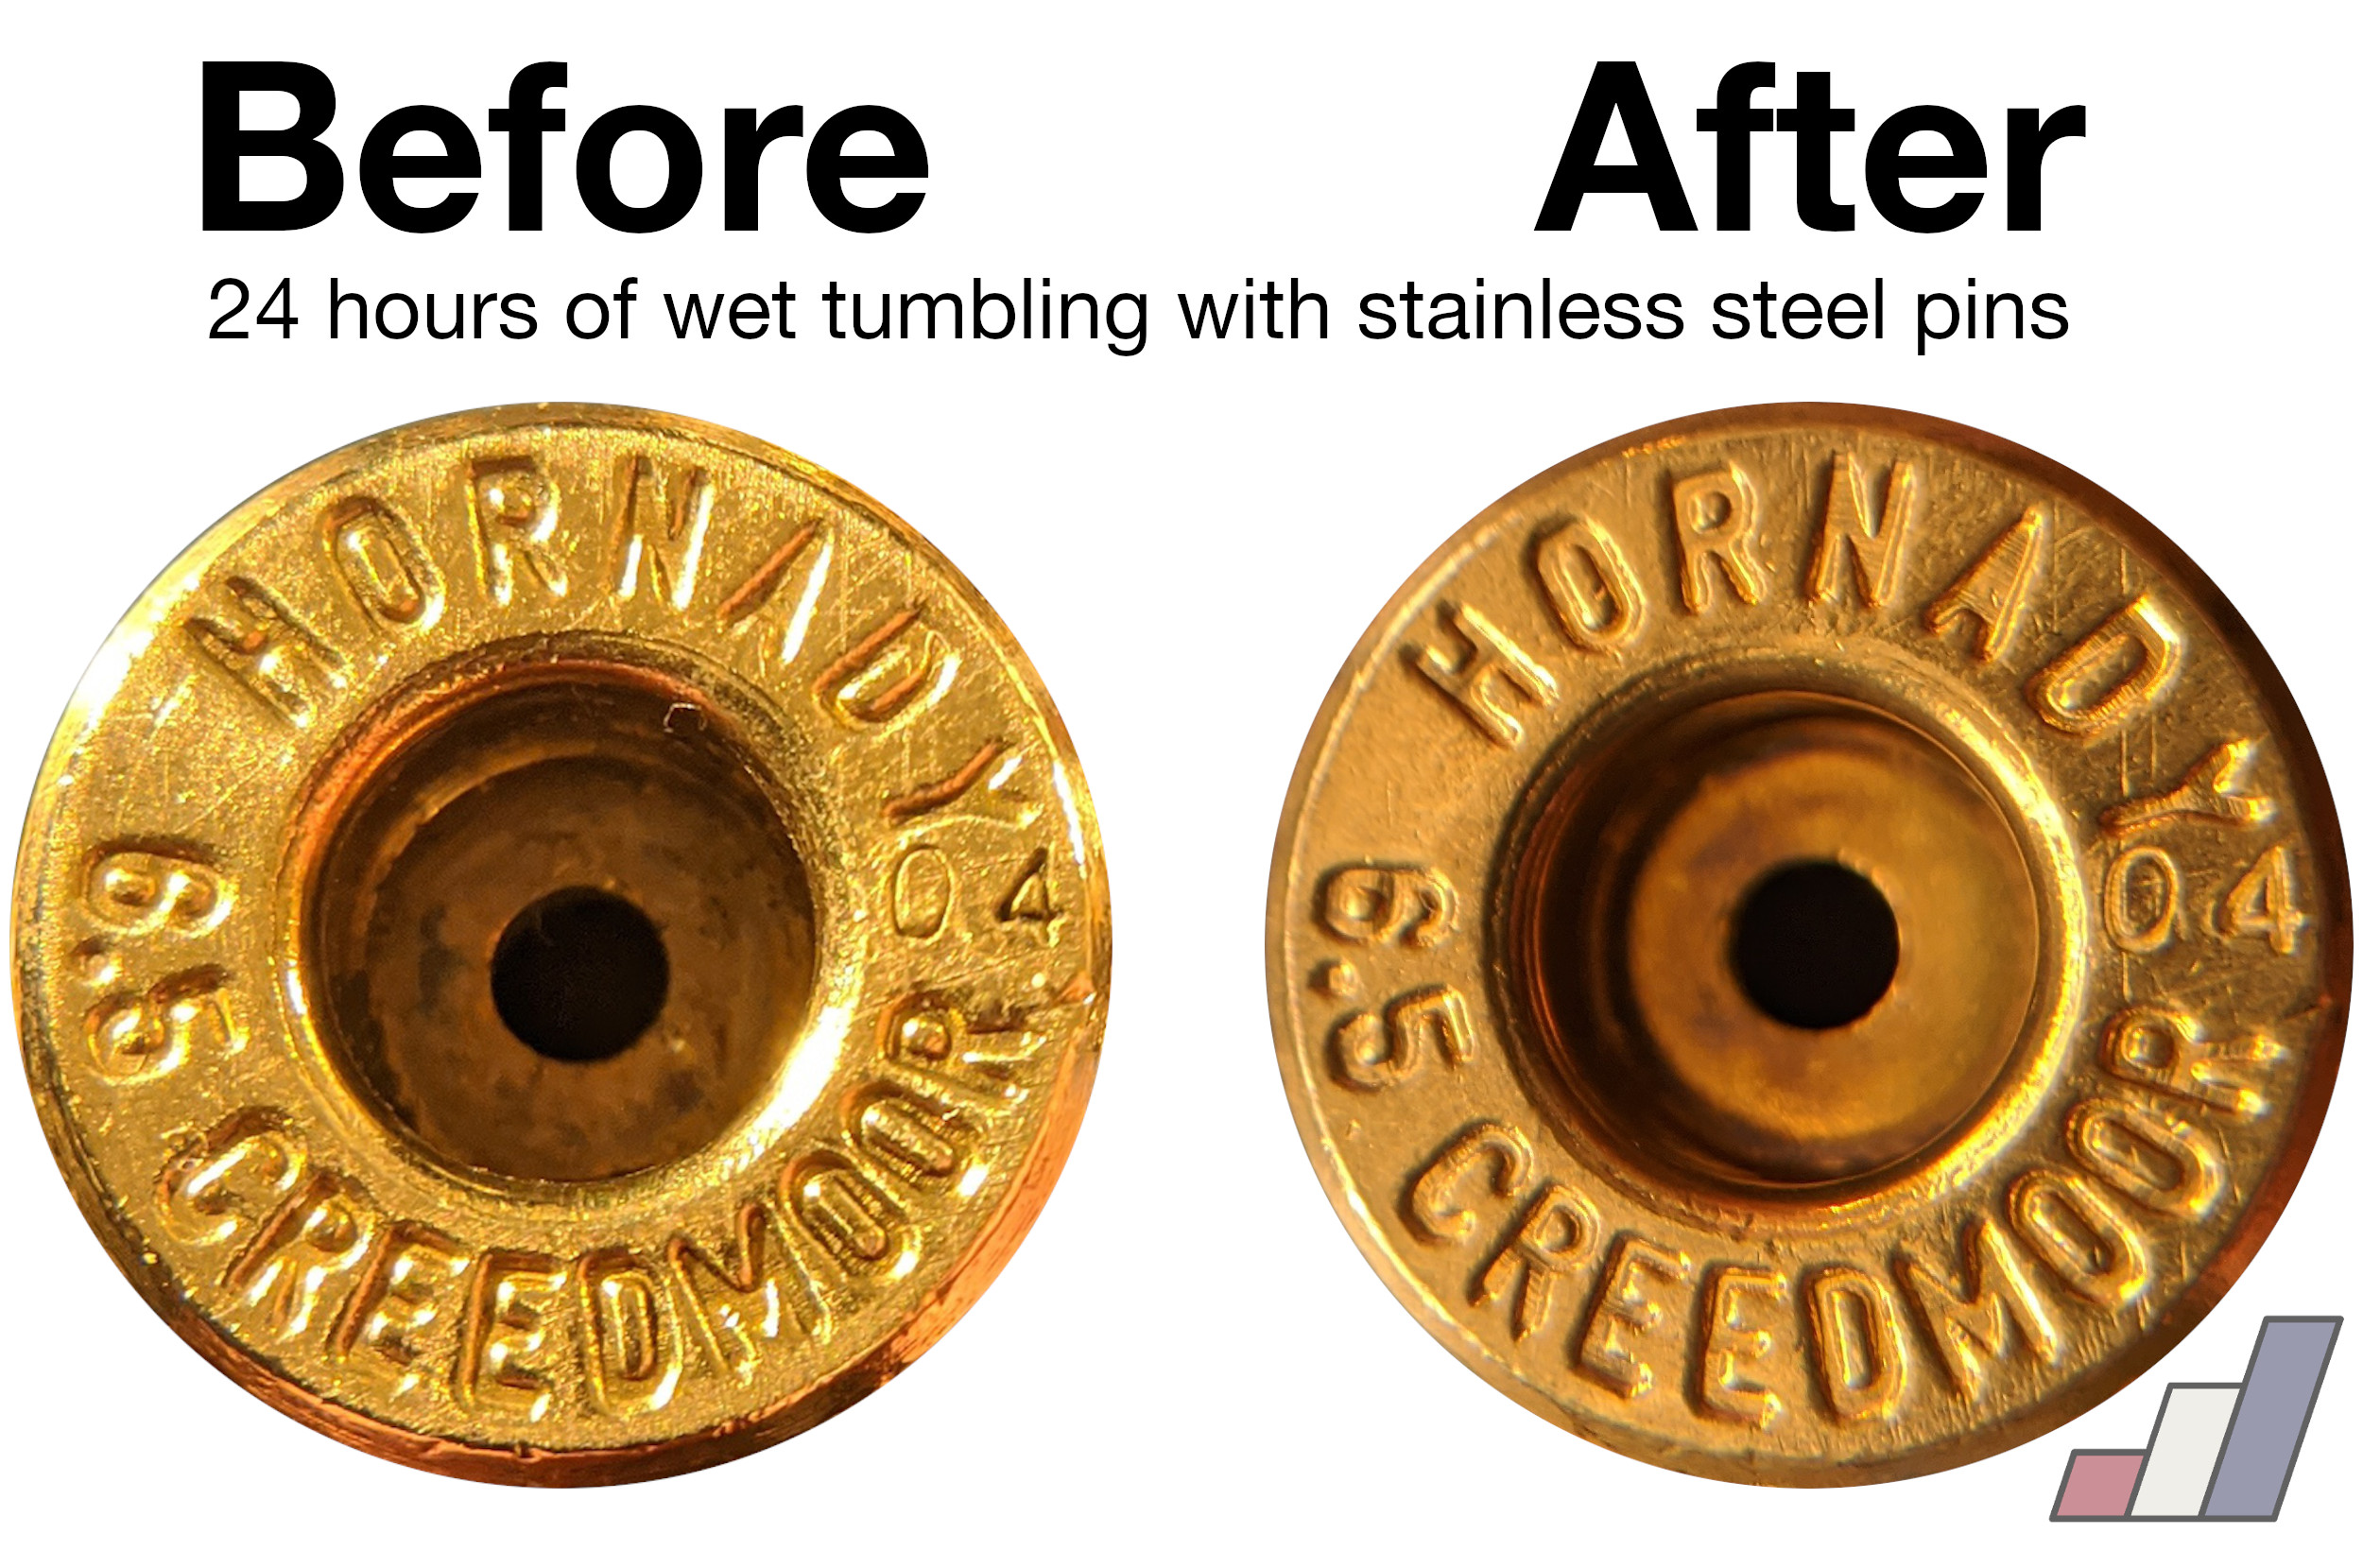 Hornady 6.5mm Creedmoor case microstamped with 04, before and after 24 hours of wet tumbling with stainless steel media.